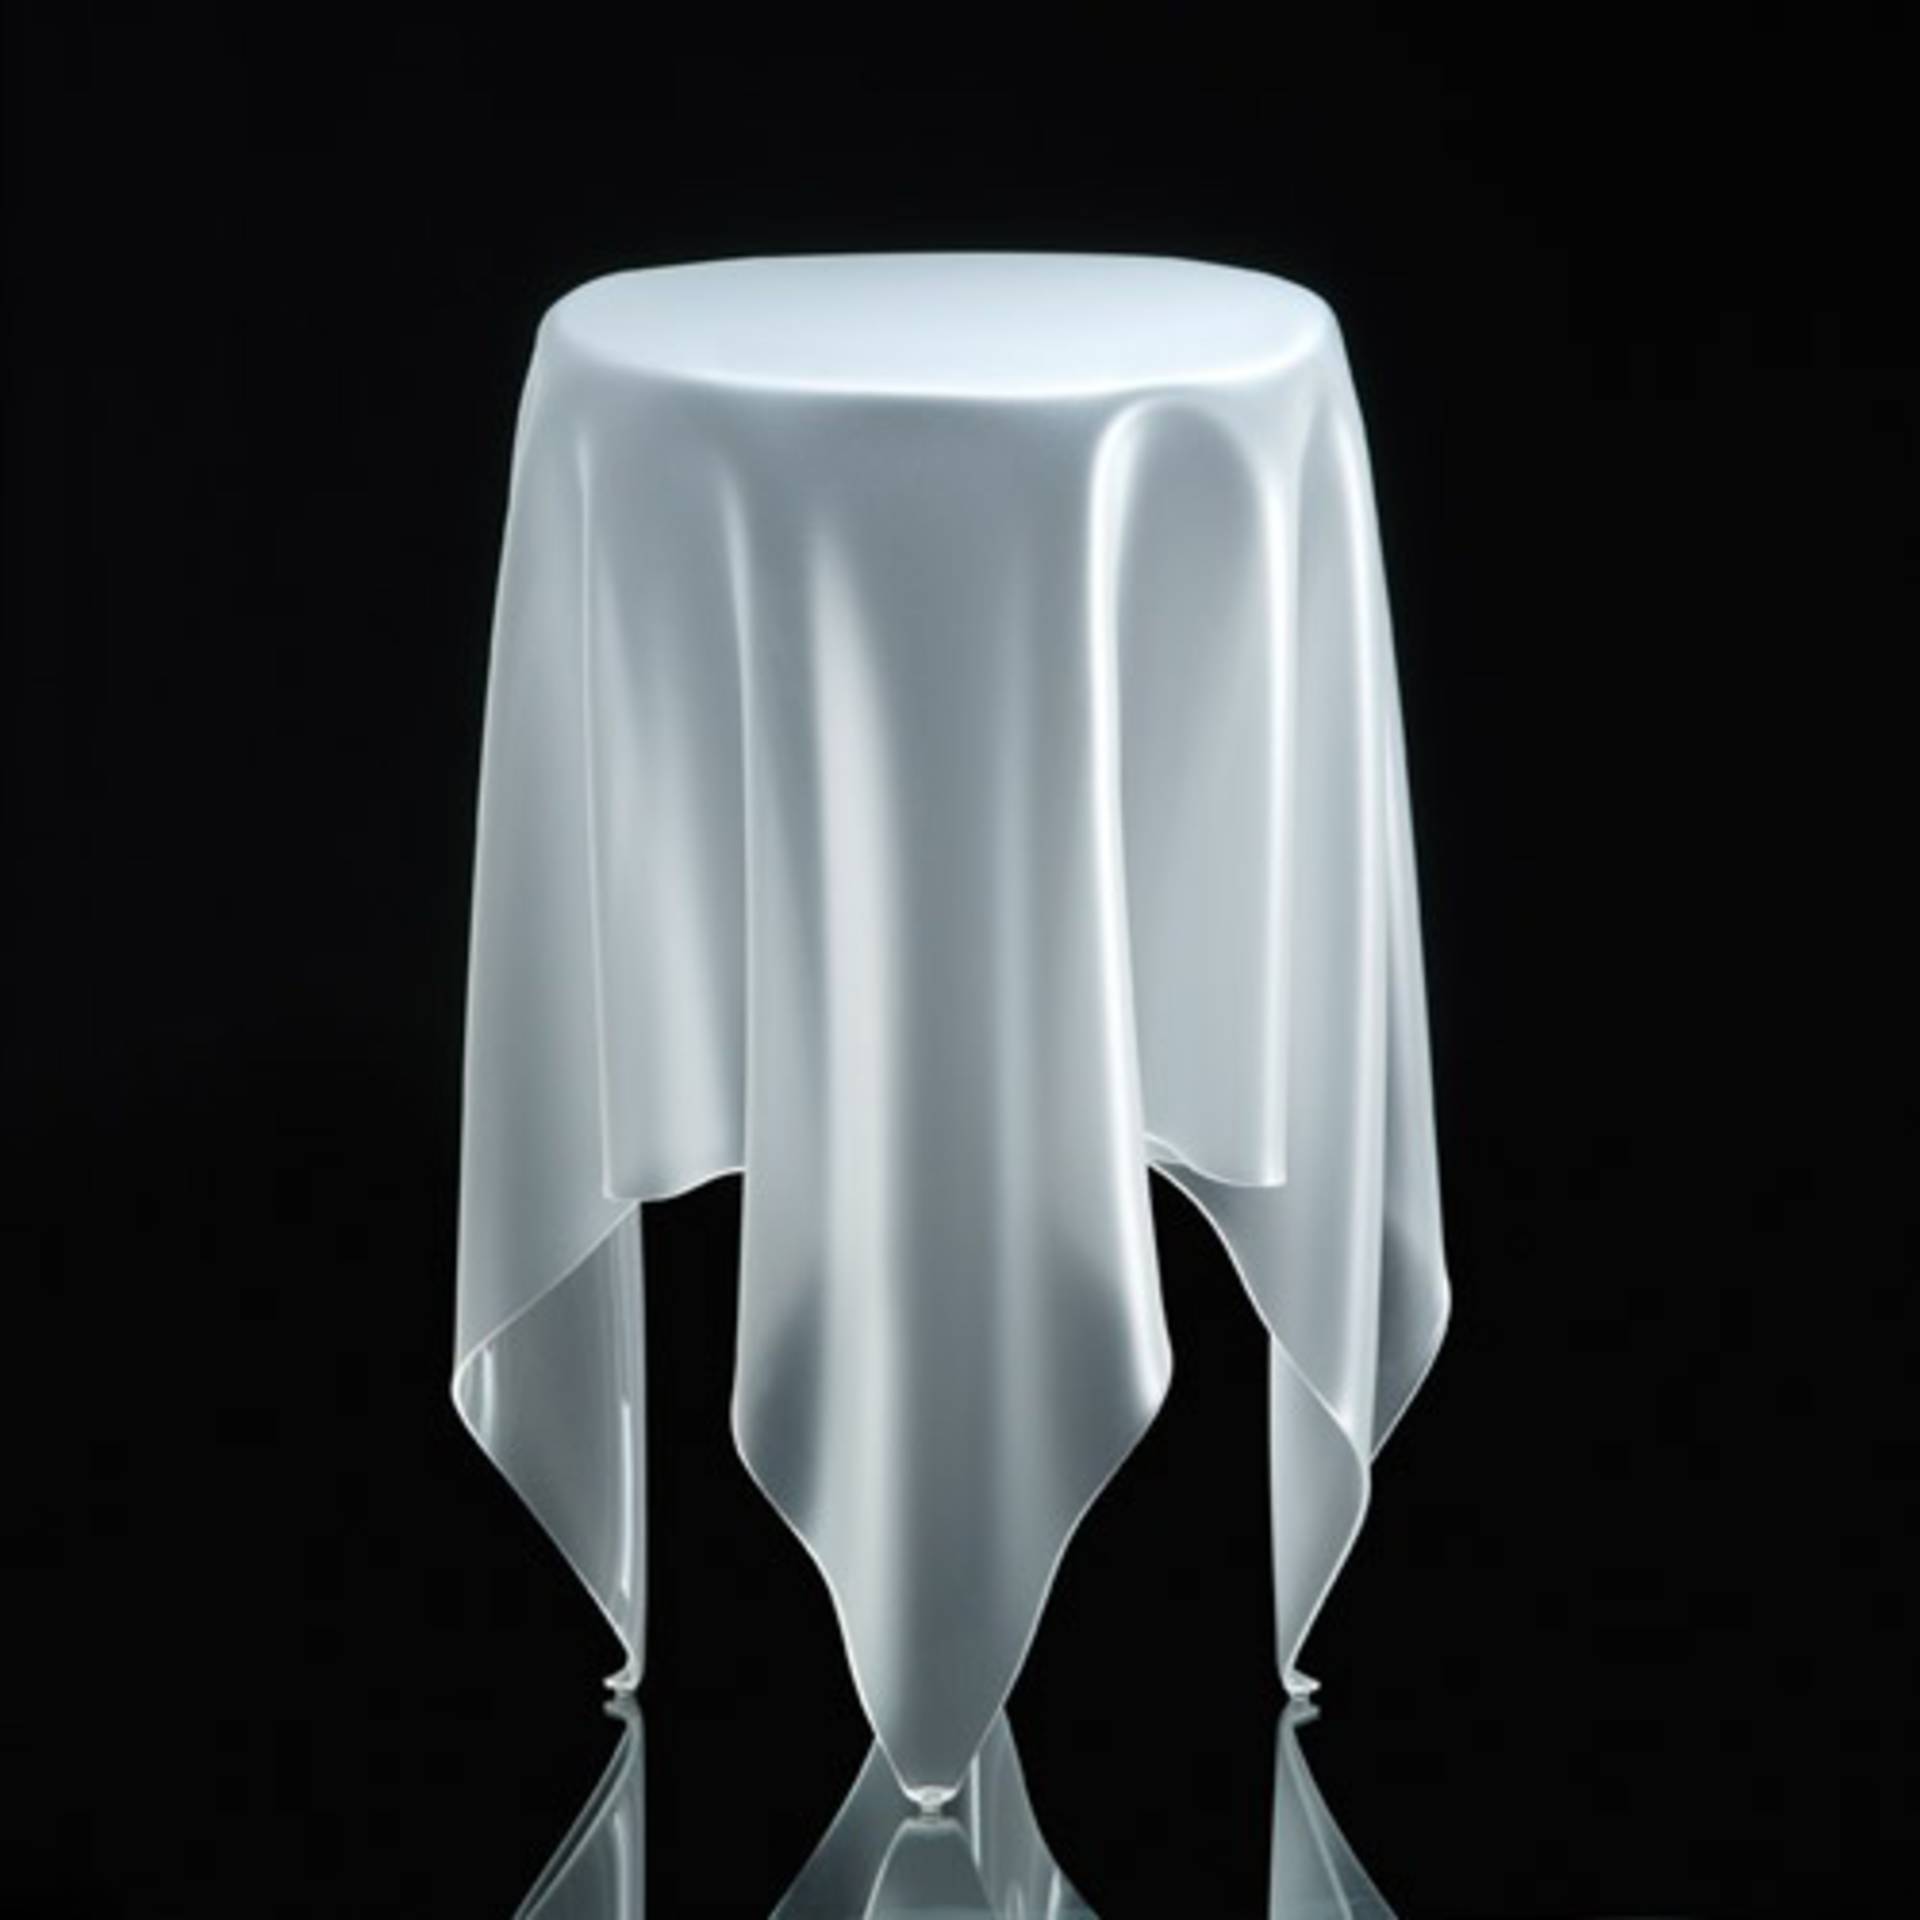 Magical Table by Essey - Home Reviews